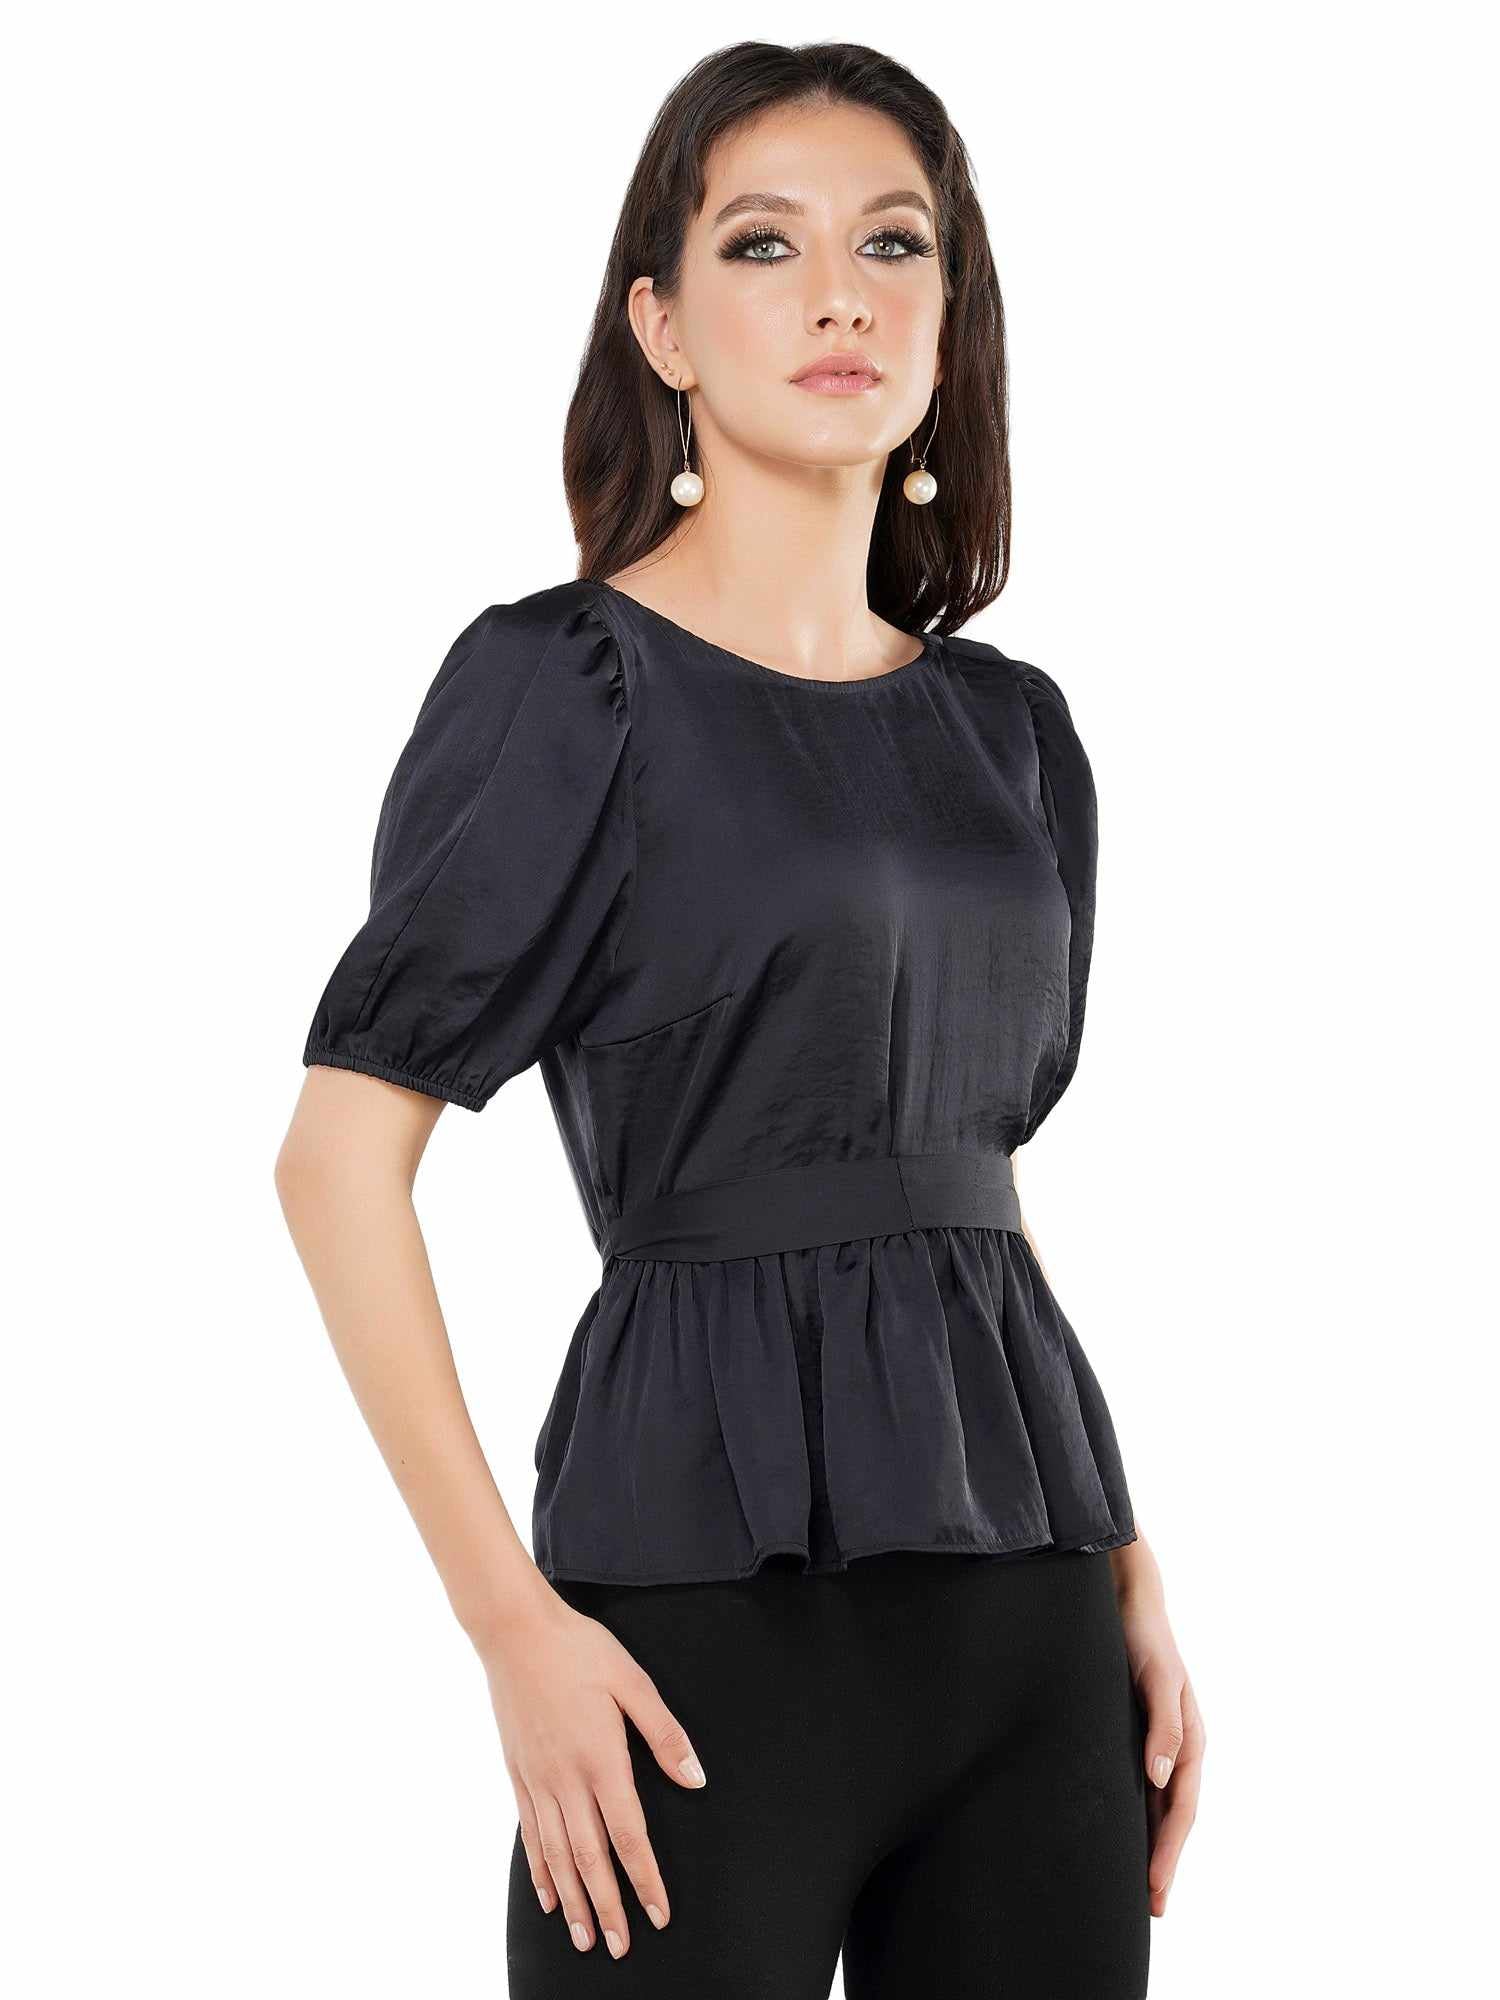 shine in black peplum wrapped blouse